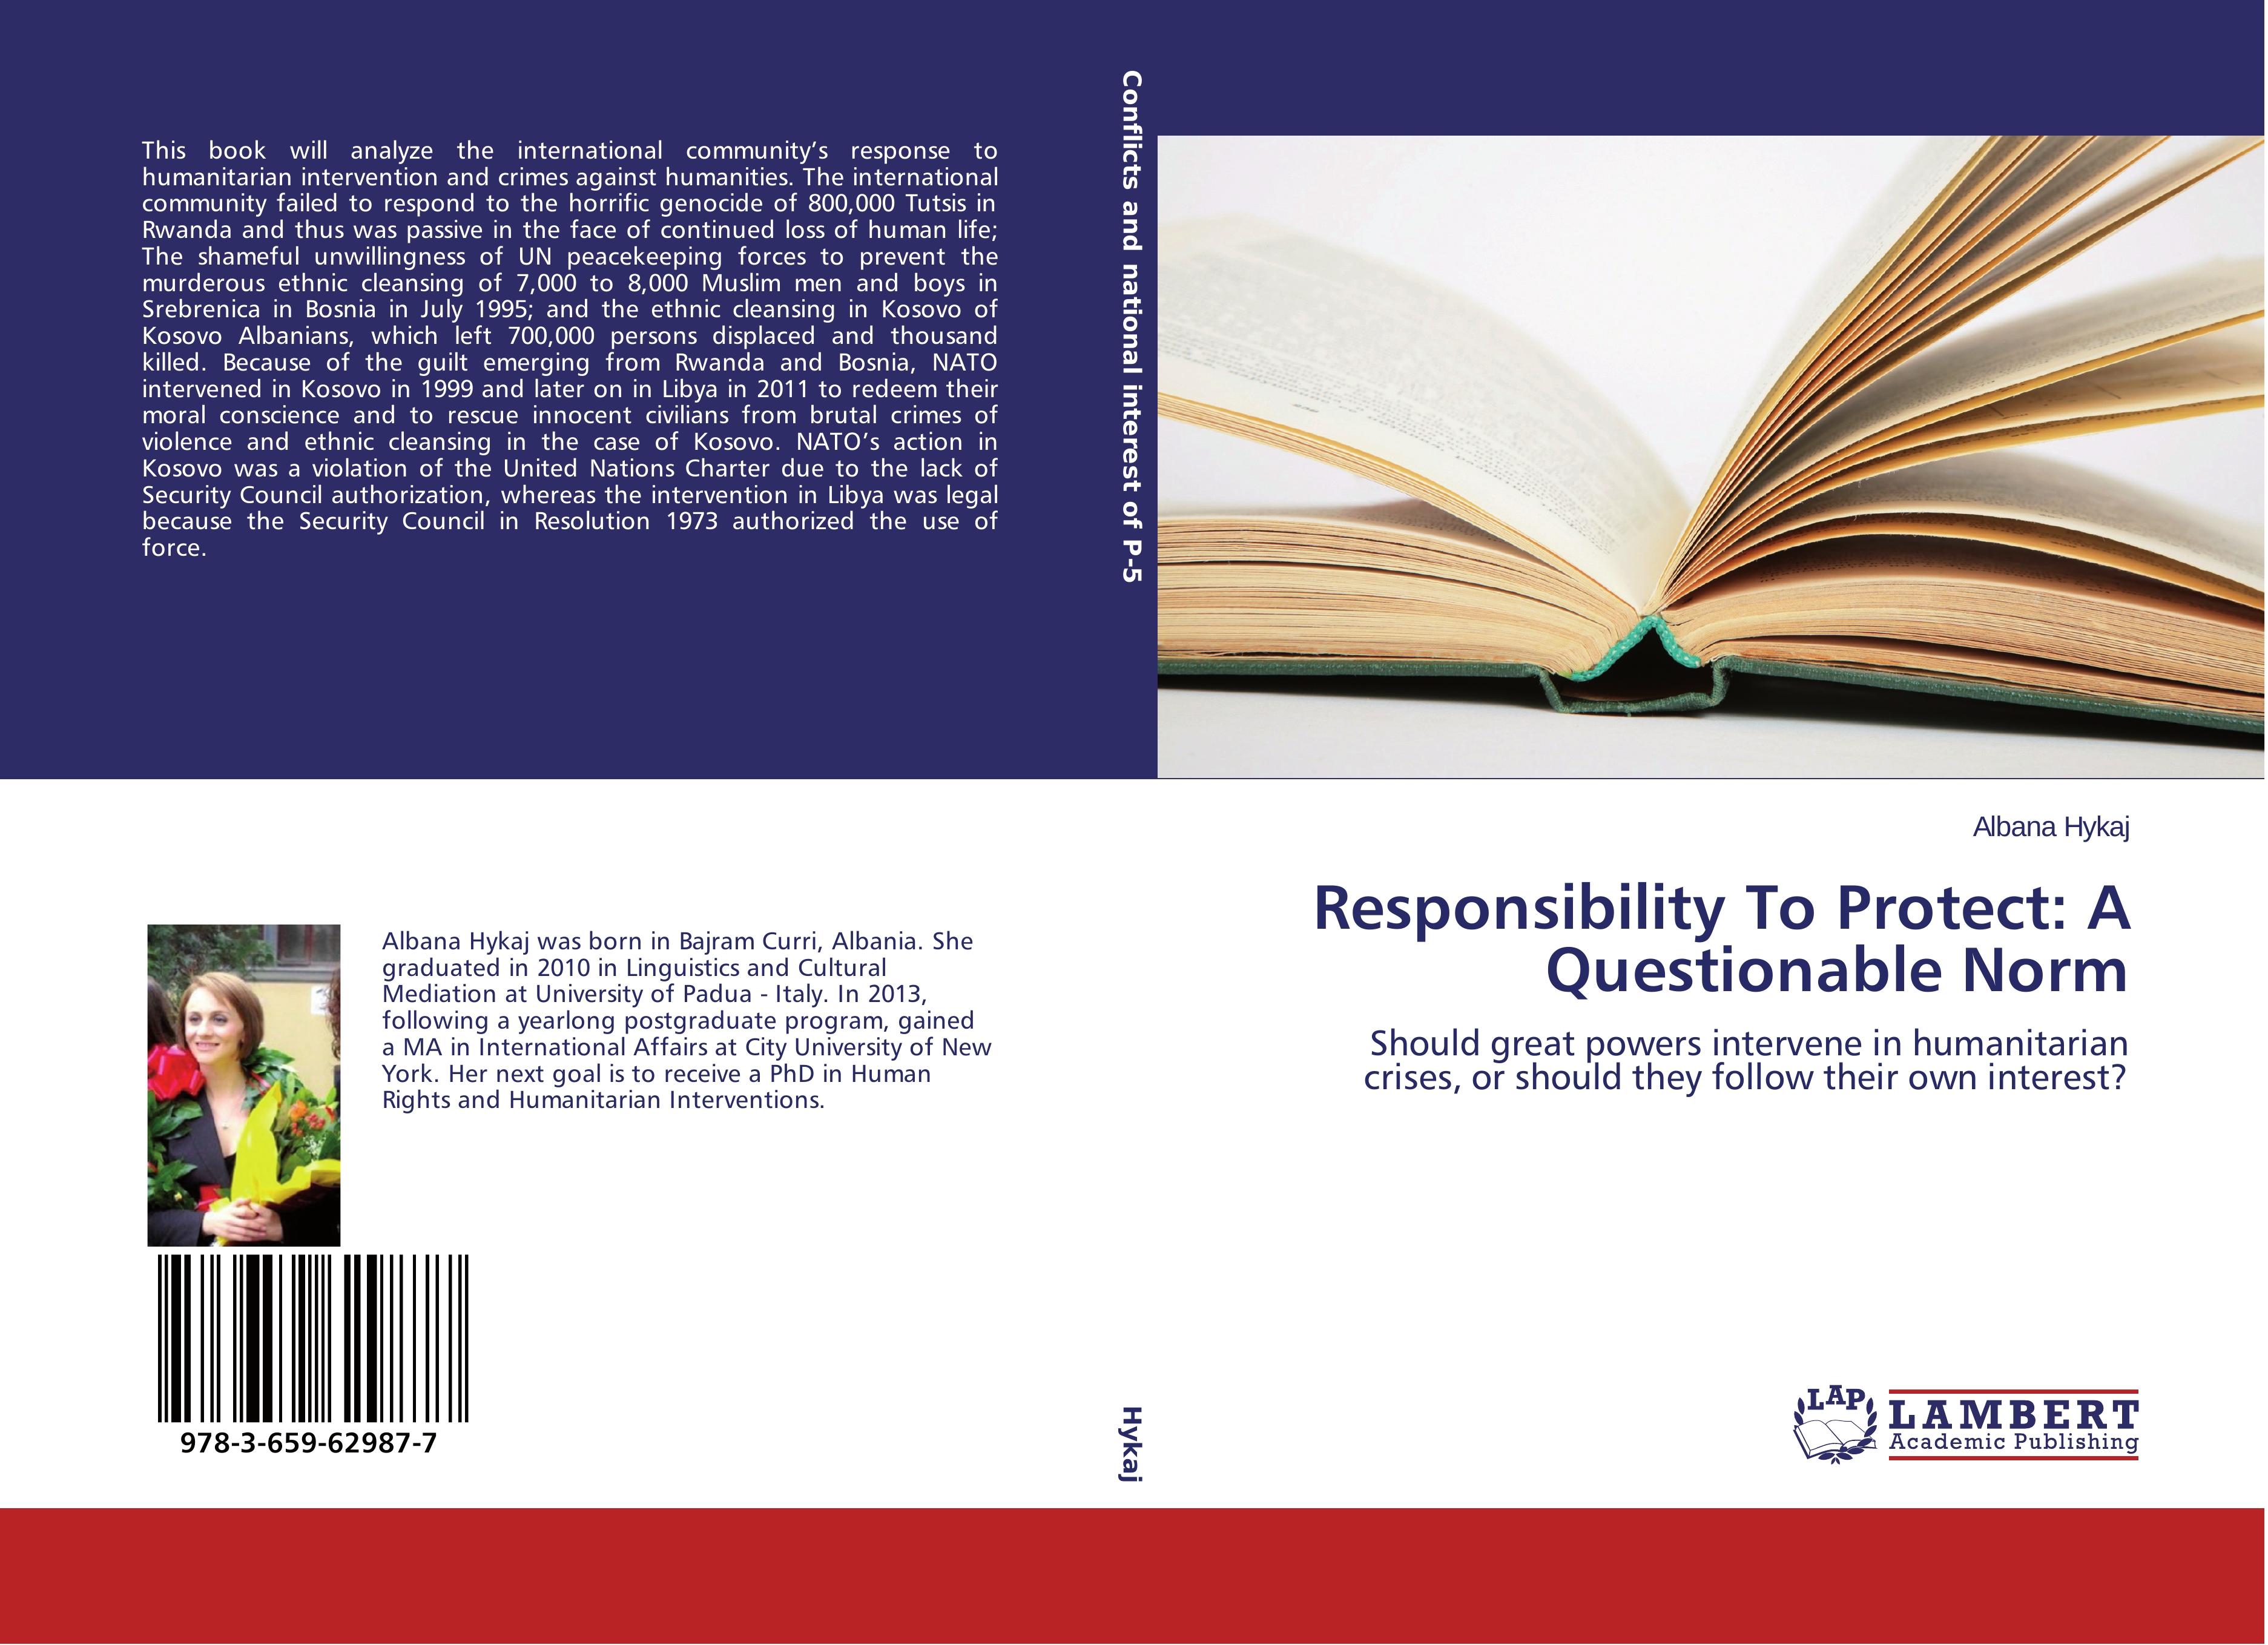 Responsibility To Protect: A Questionable Norm | Should great powers intervene in humanitarian crises, or should they follow their own interest? | Albana Hykaj | Taschenbuch | Paperback | 116 S. - Hykaj, Albana